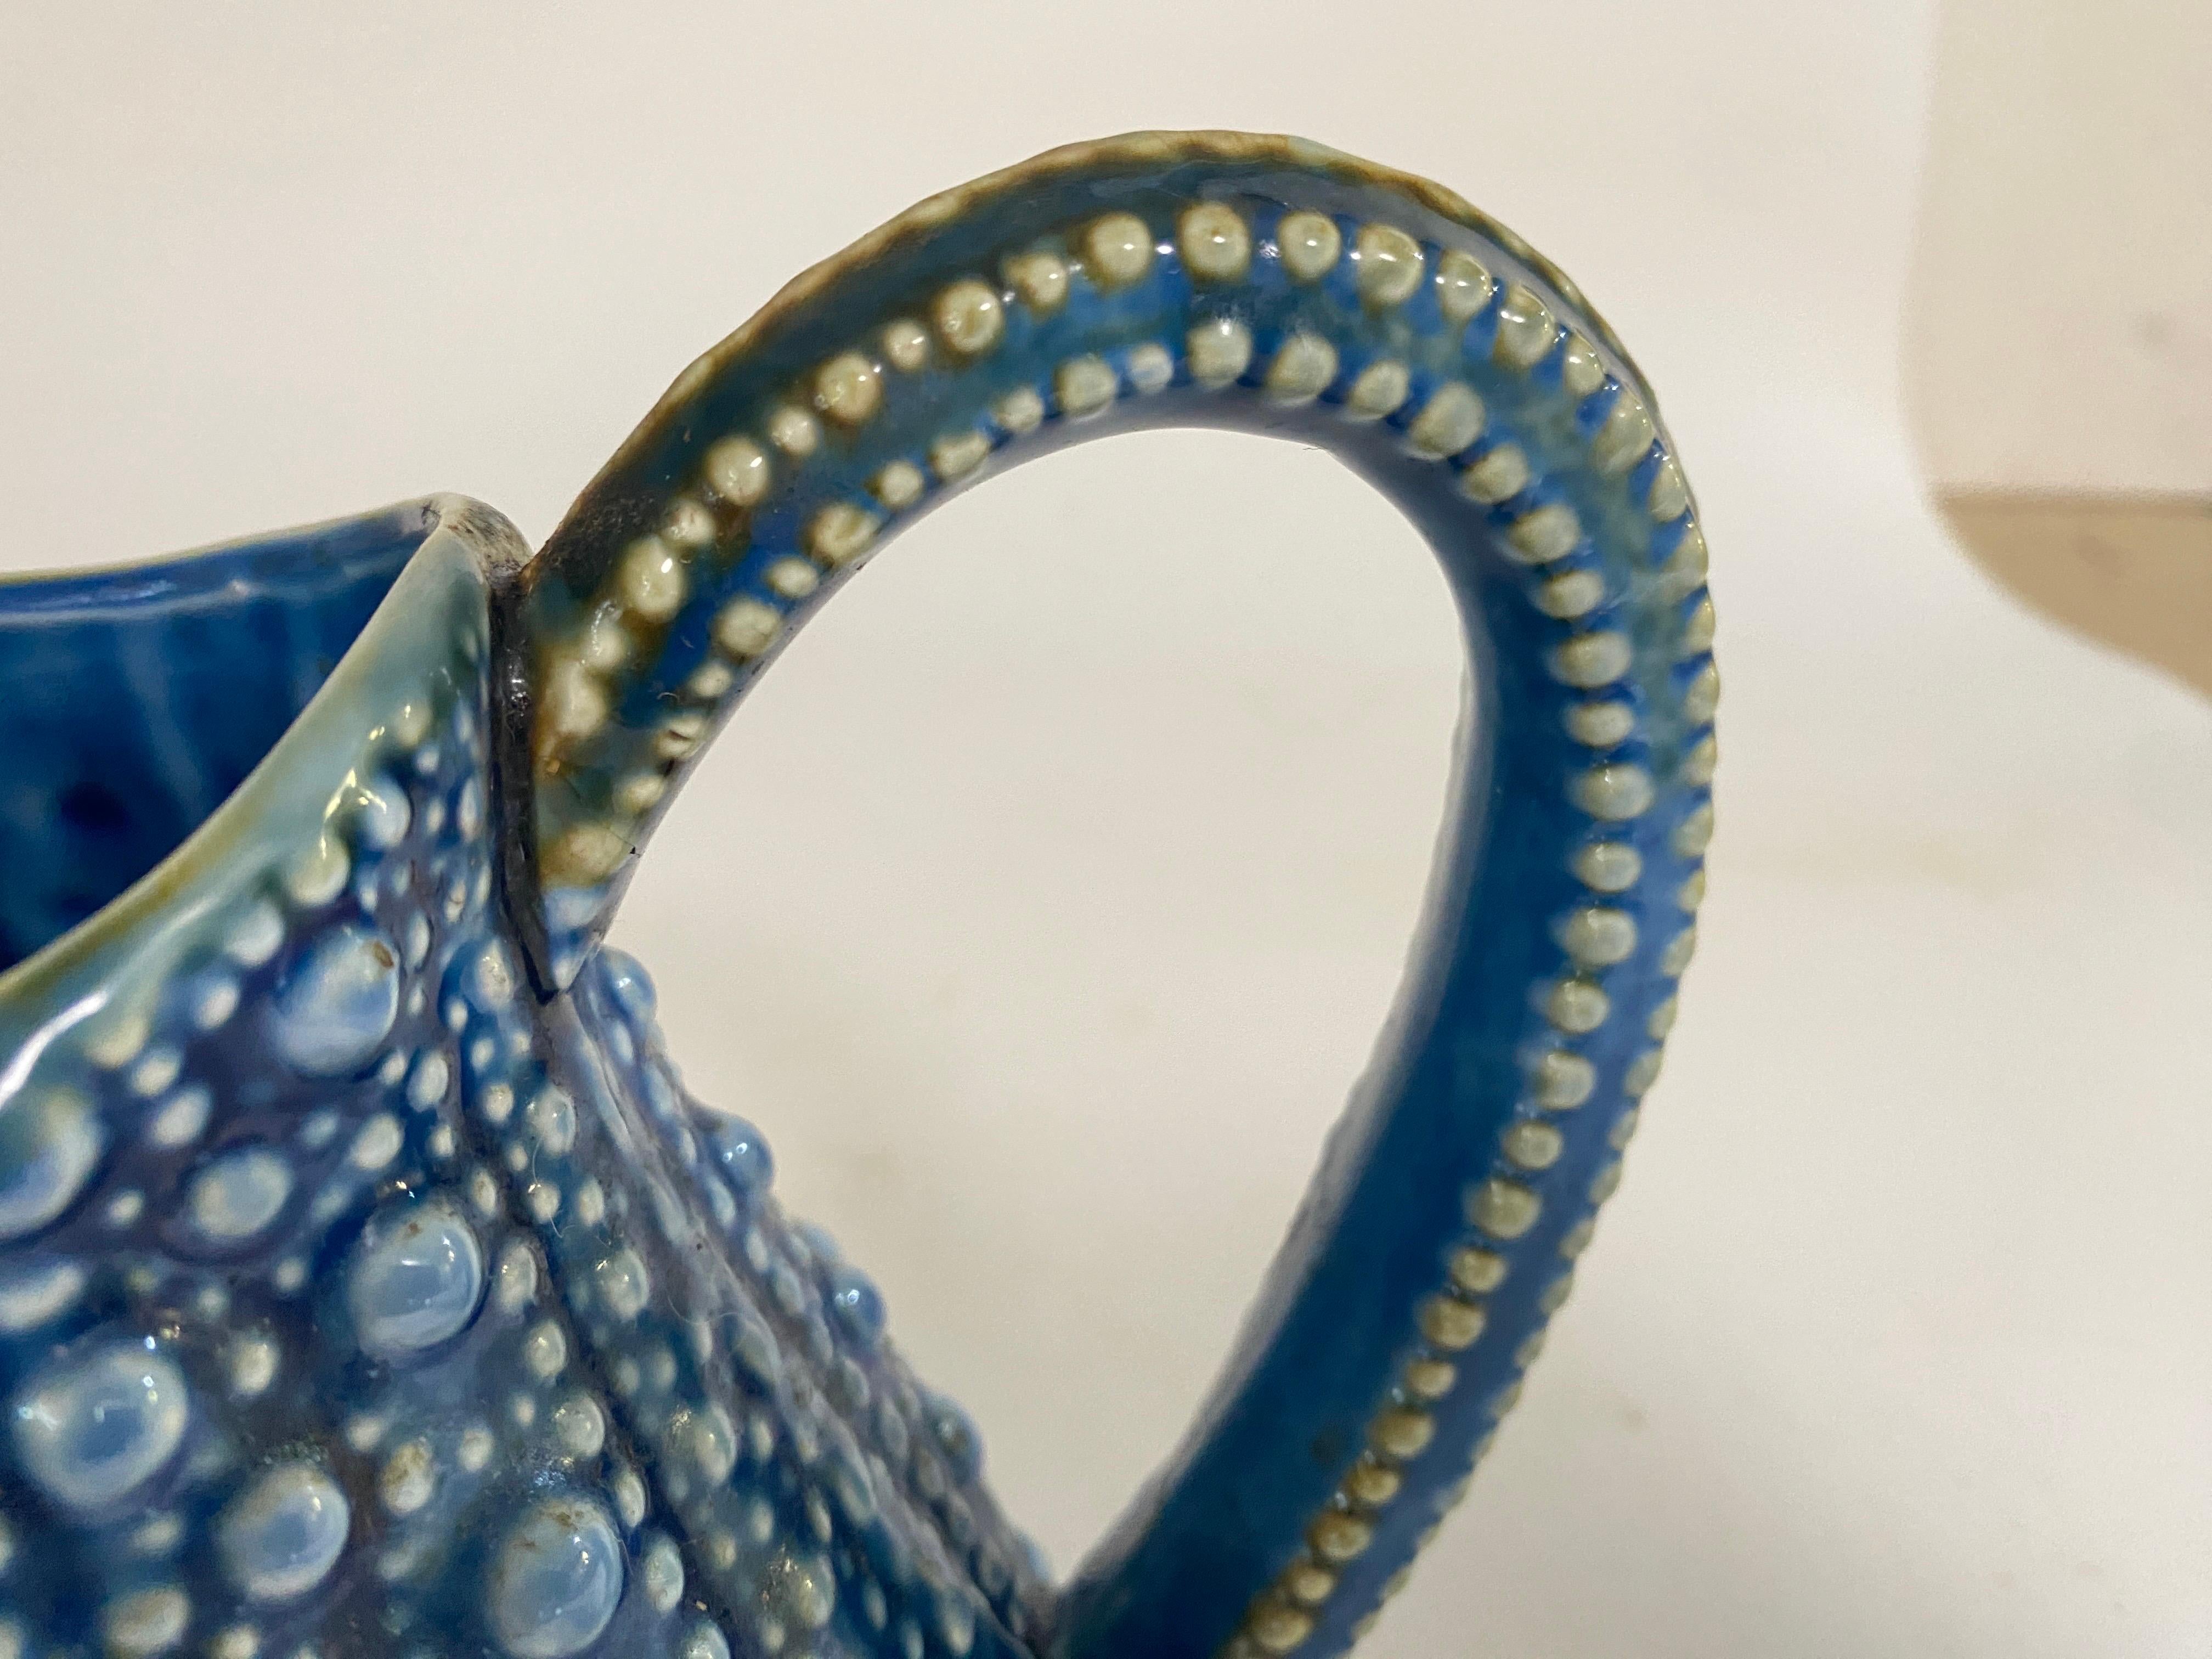 Early 20th Century Majolica Pitcher or Jug circa 1900 Blue and White Color France